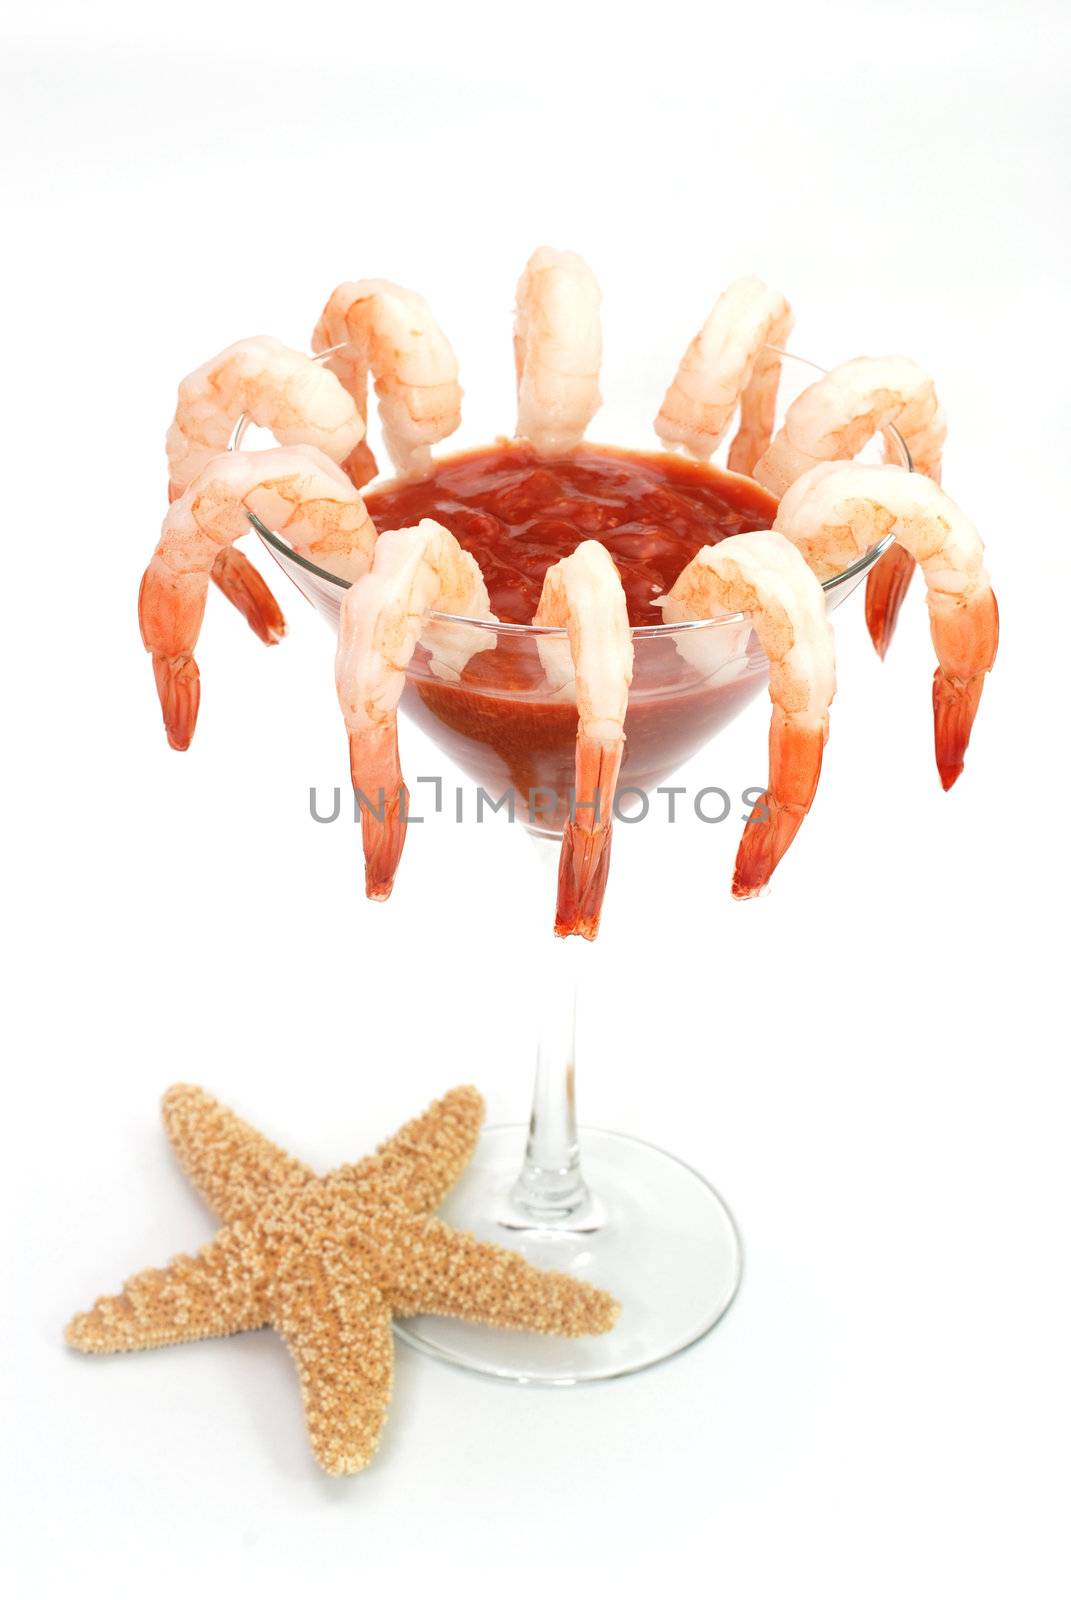 Shrimp cocktail in martini glass with starfish.